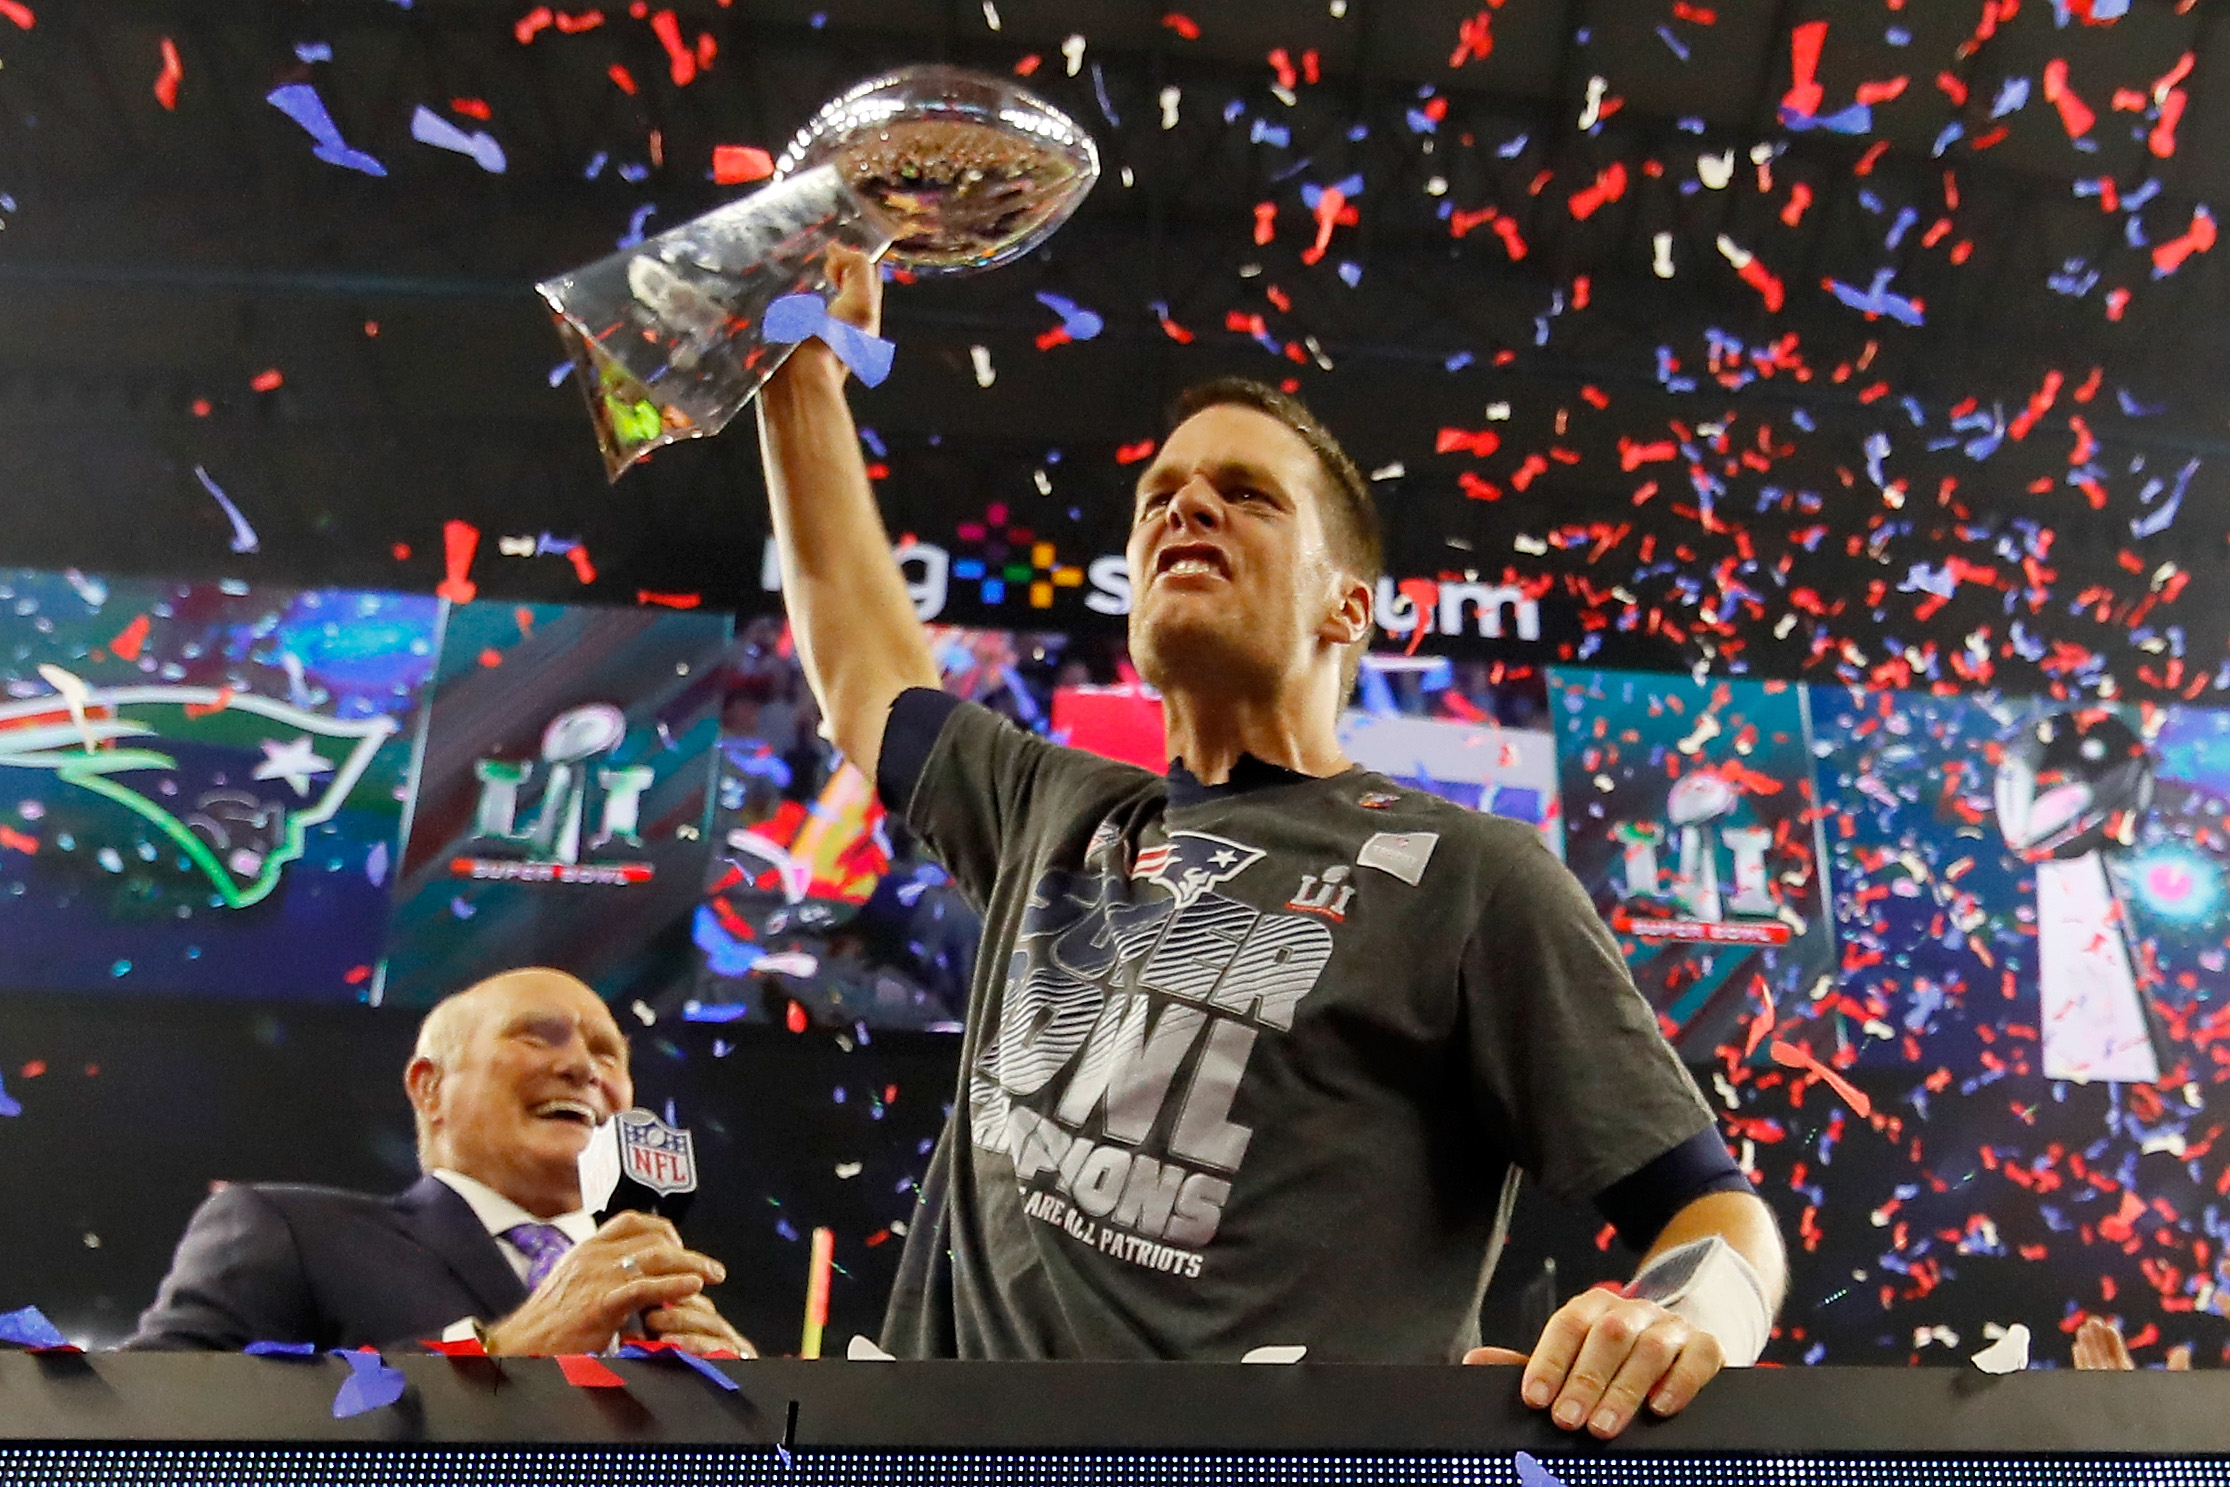 PHOTO: Tom Brady of the New England Patriots celebrates with the Vince Lombardi Trophy after defeating the Atlanta Falcons during Super Bowl 51 at NRG Stadium on Feb. 5, 2017 in Houston, Texas.